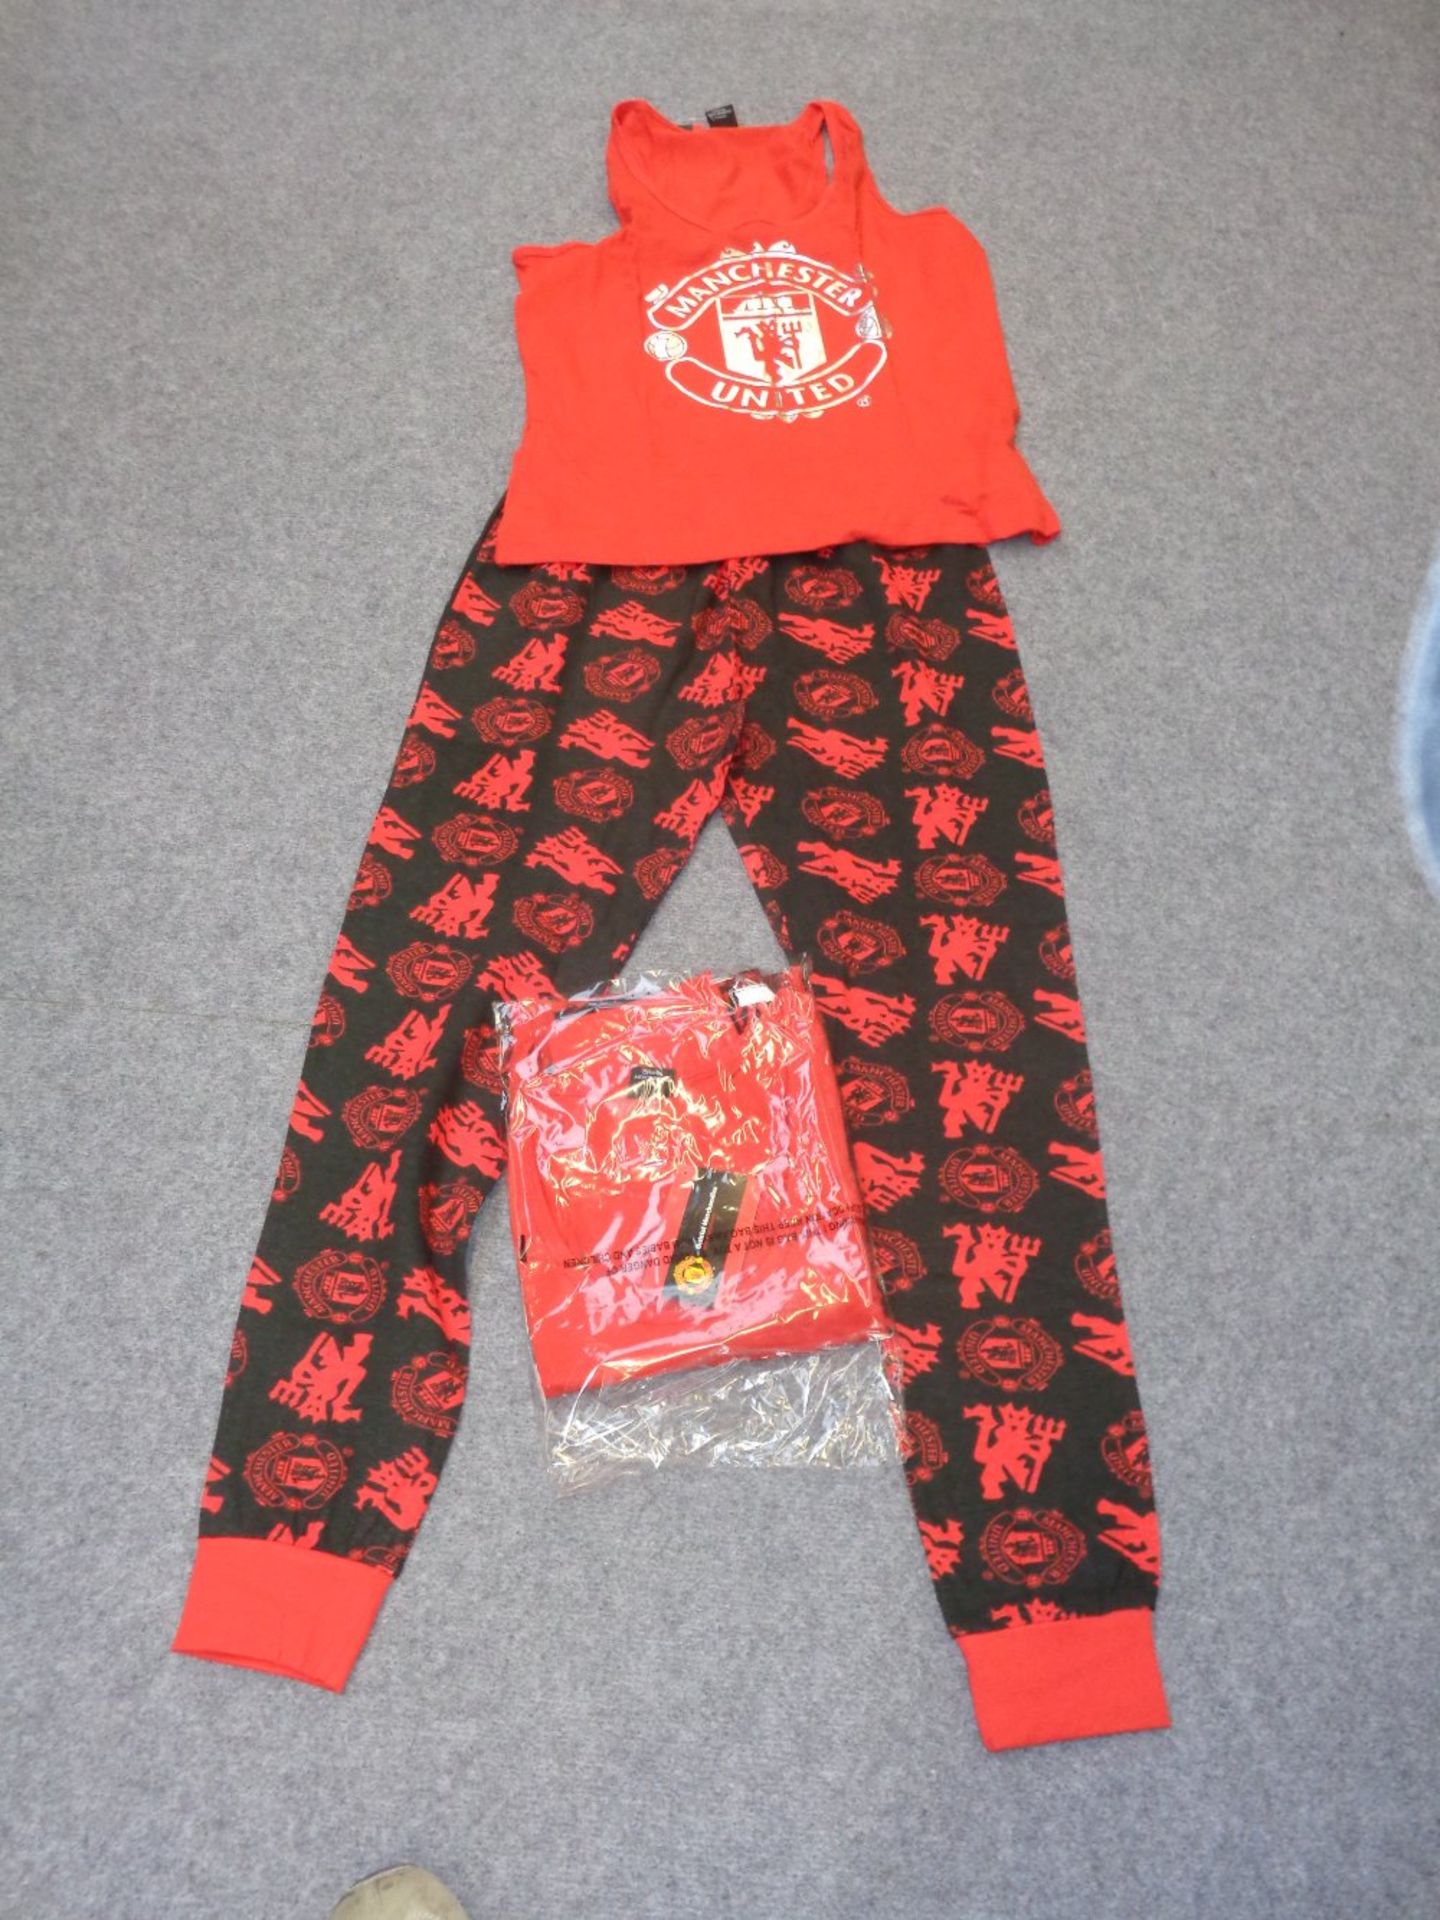 5 X ADULTS MANCHESTER UTD PYJAMAS  (DELIVERY BAND A)